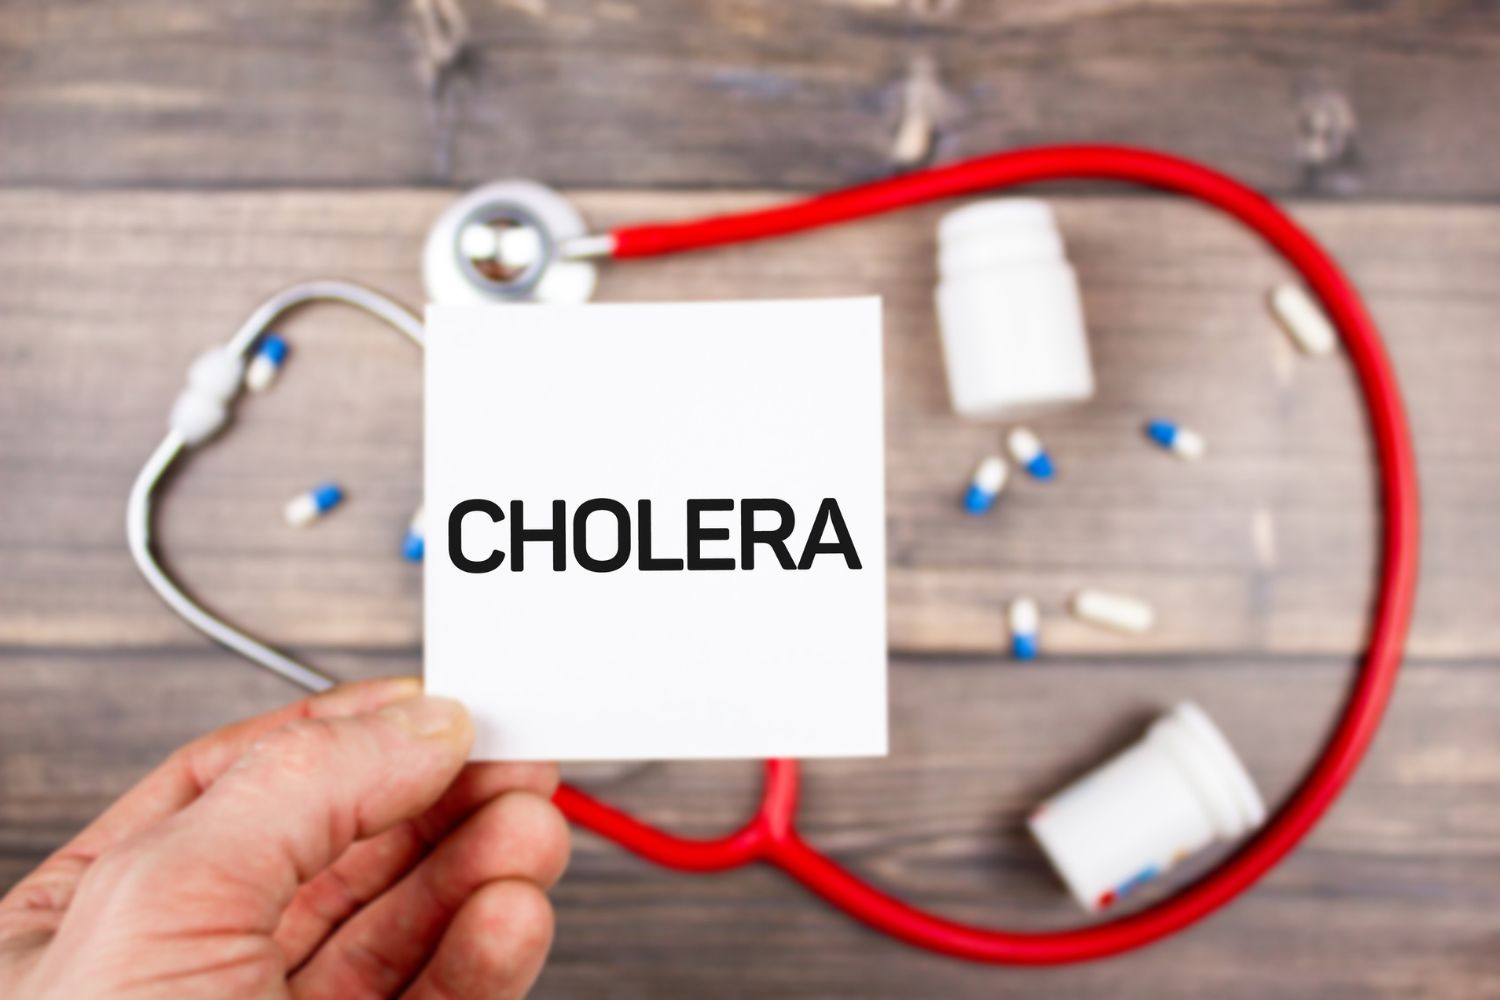 Here's everything you need to know about cholera